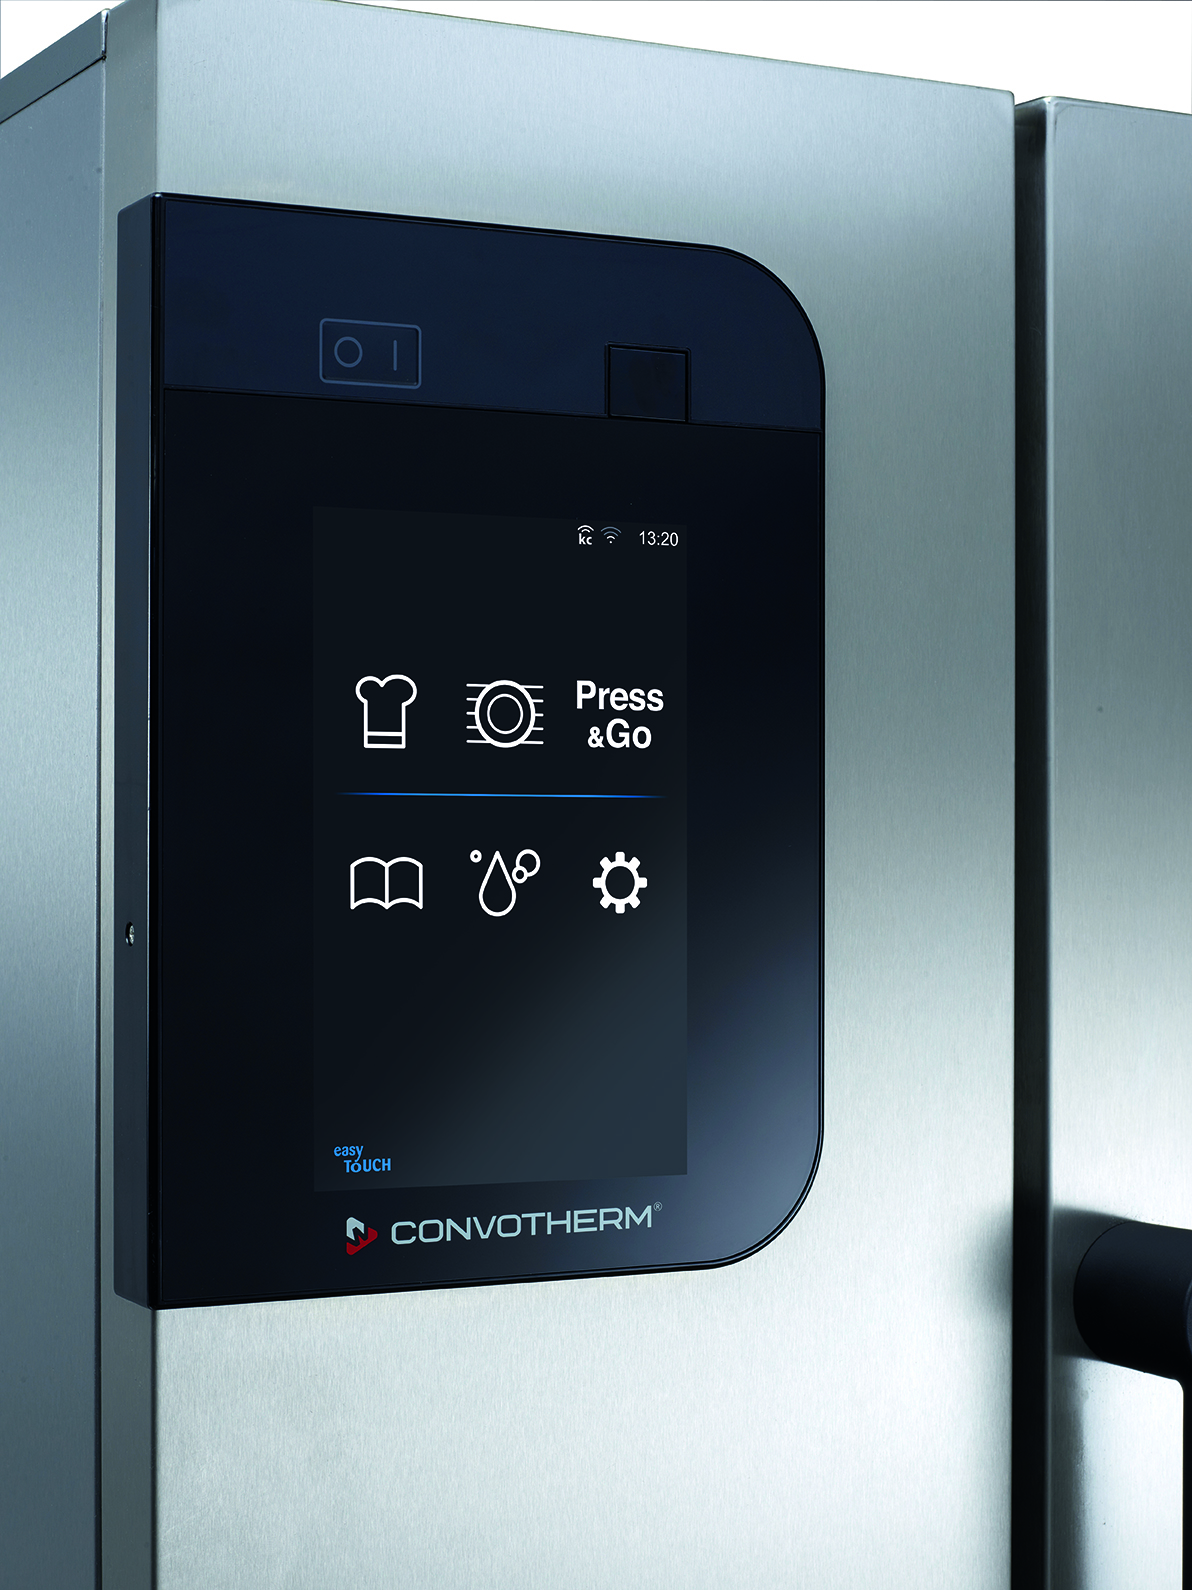 Convotherm maxx pro touch screen